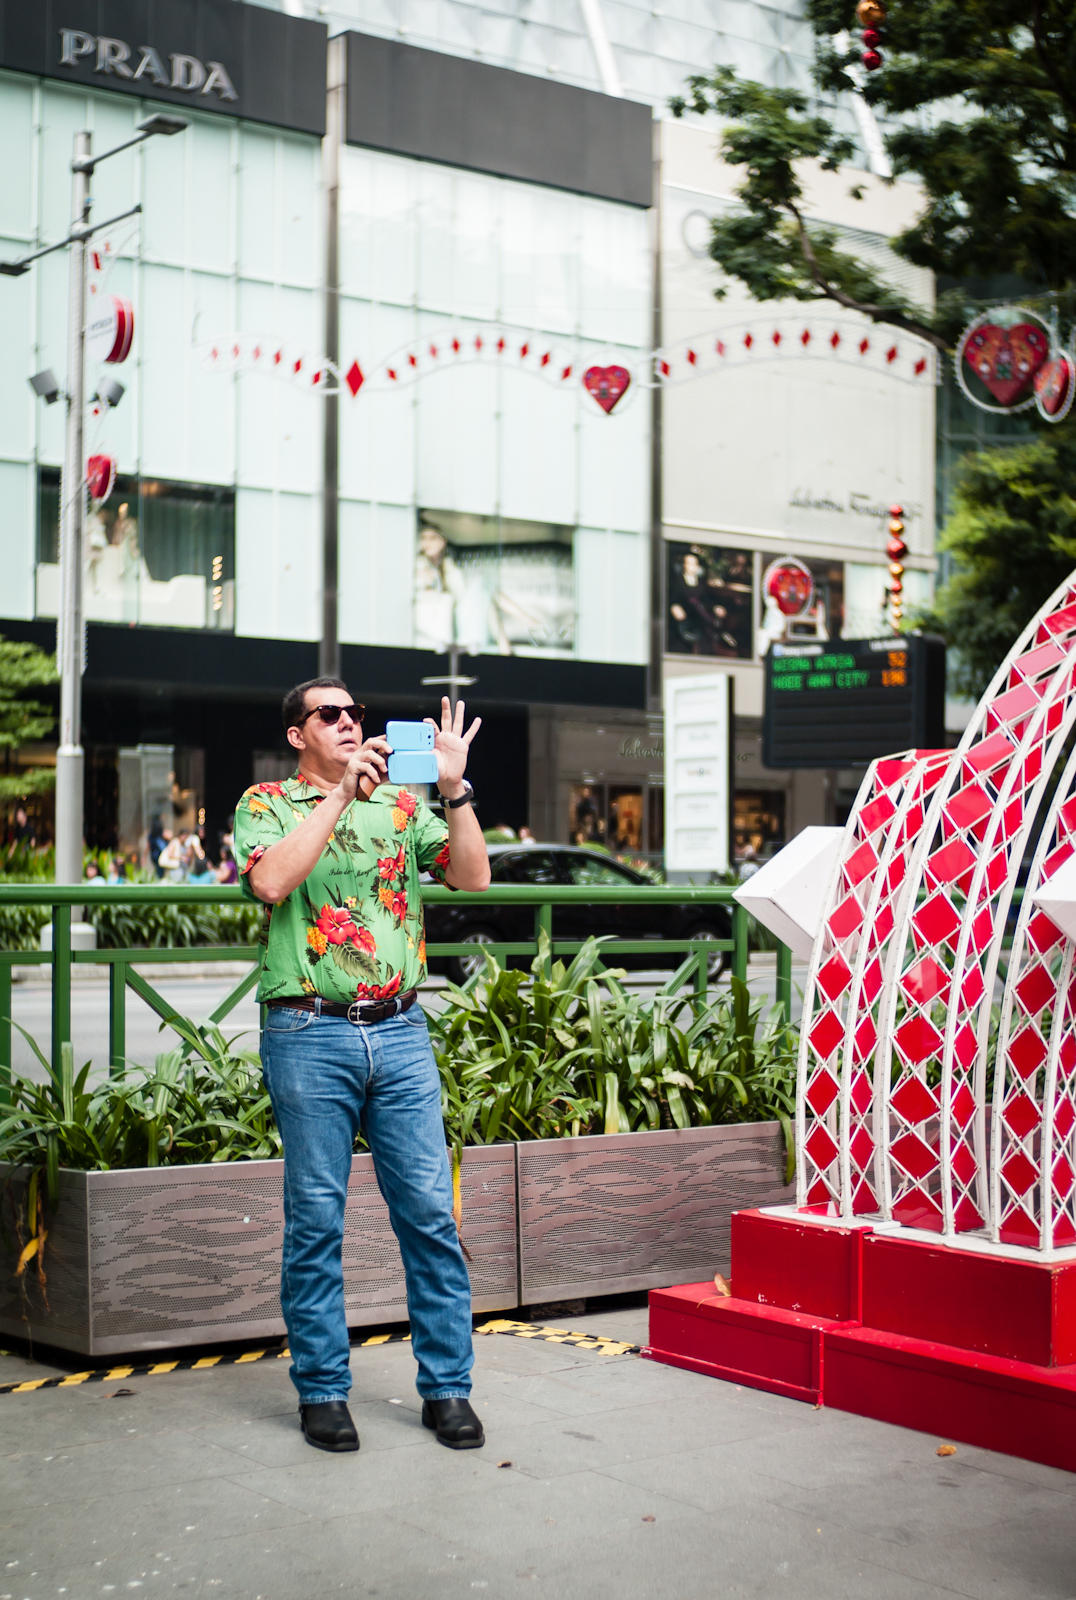 A man in bright clothing taking photos with his smartphone camera